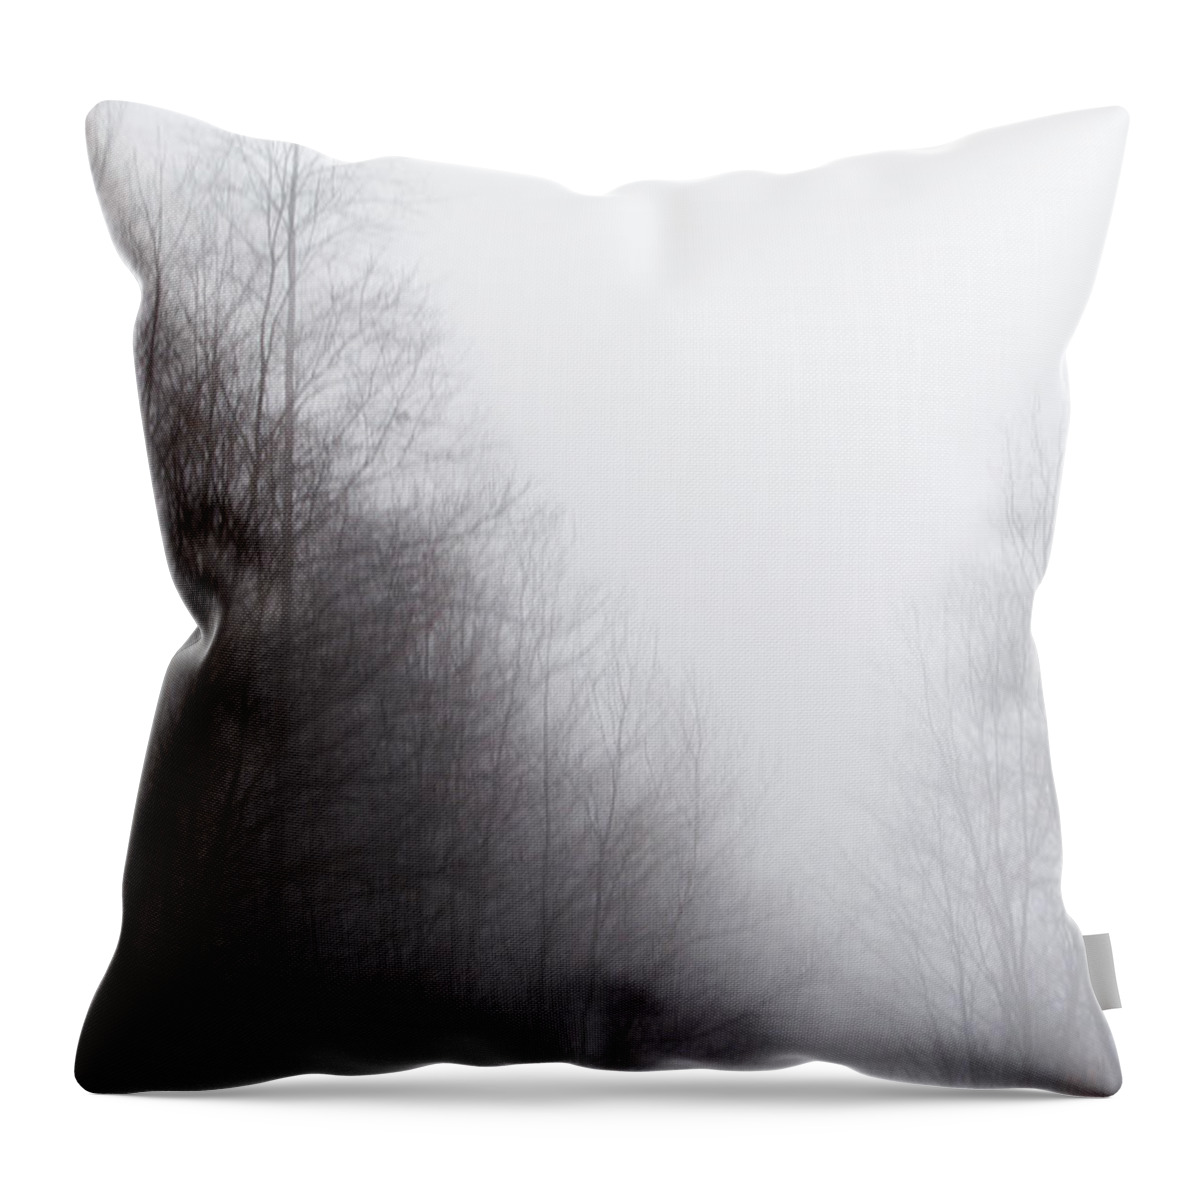 Mist Throw Pillow featuring the photograph The Myst by Tyler Marks